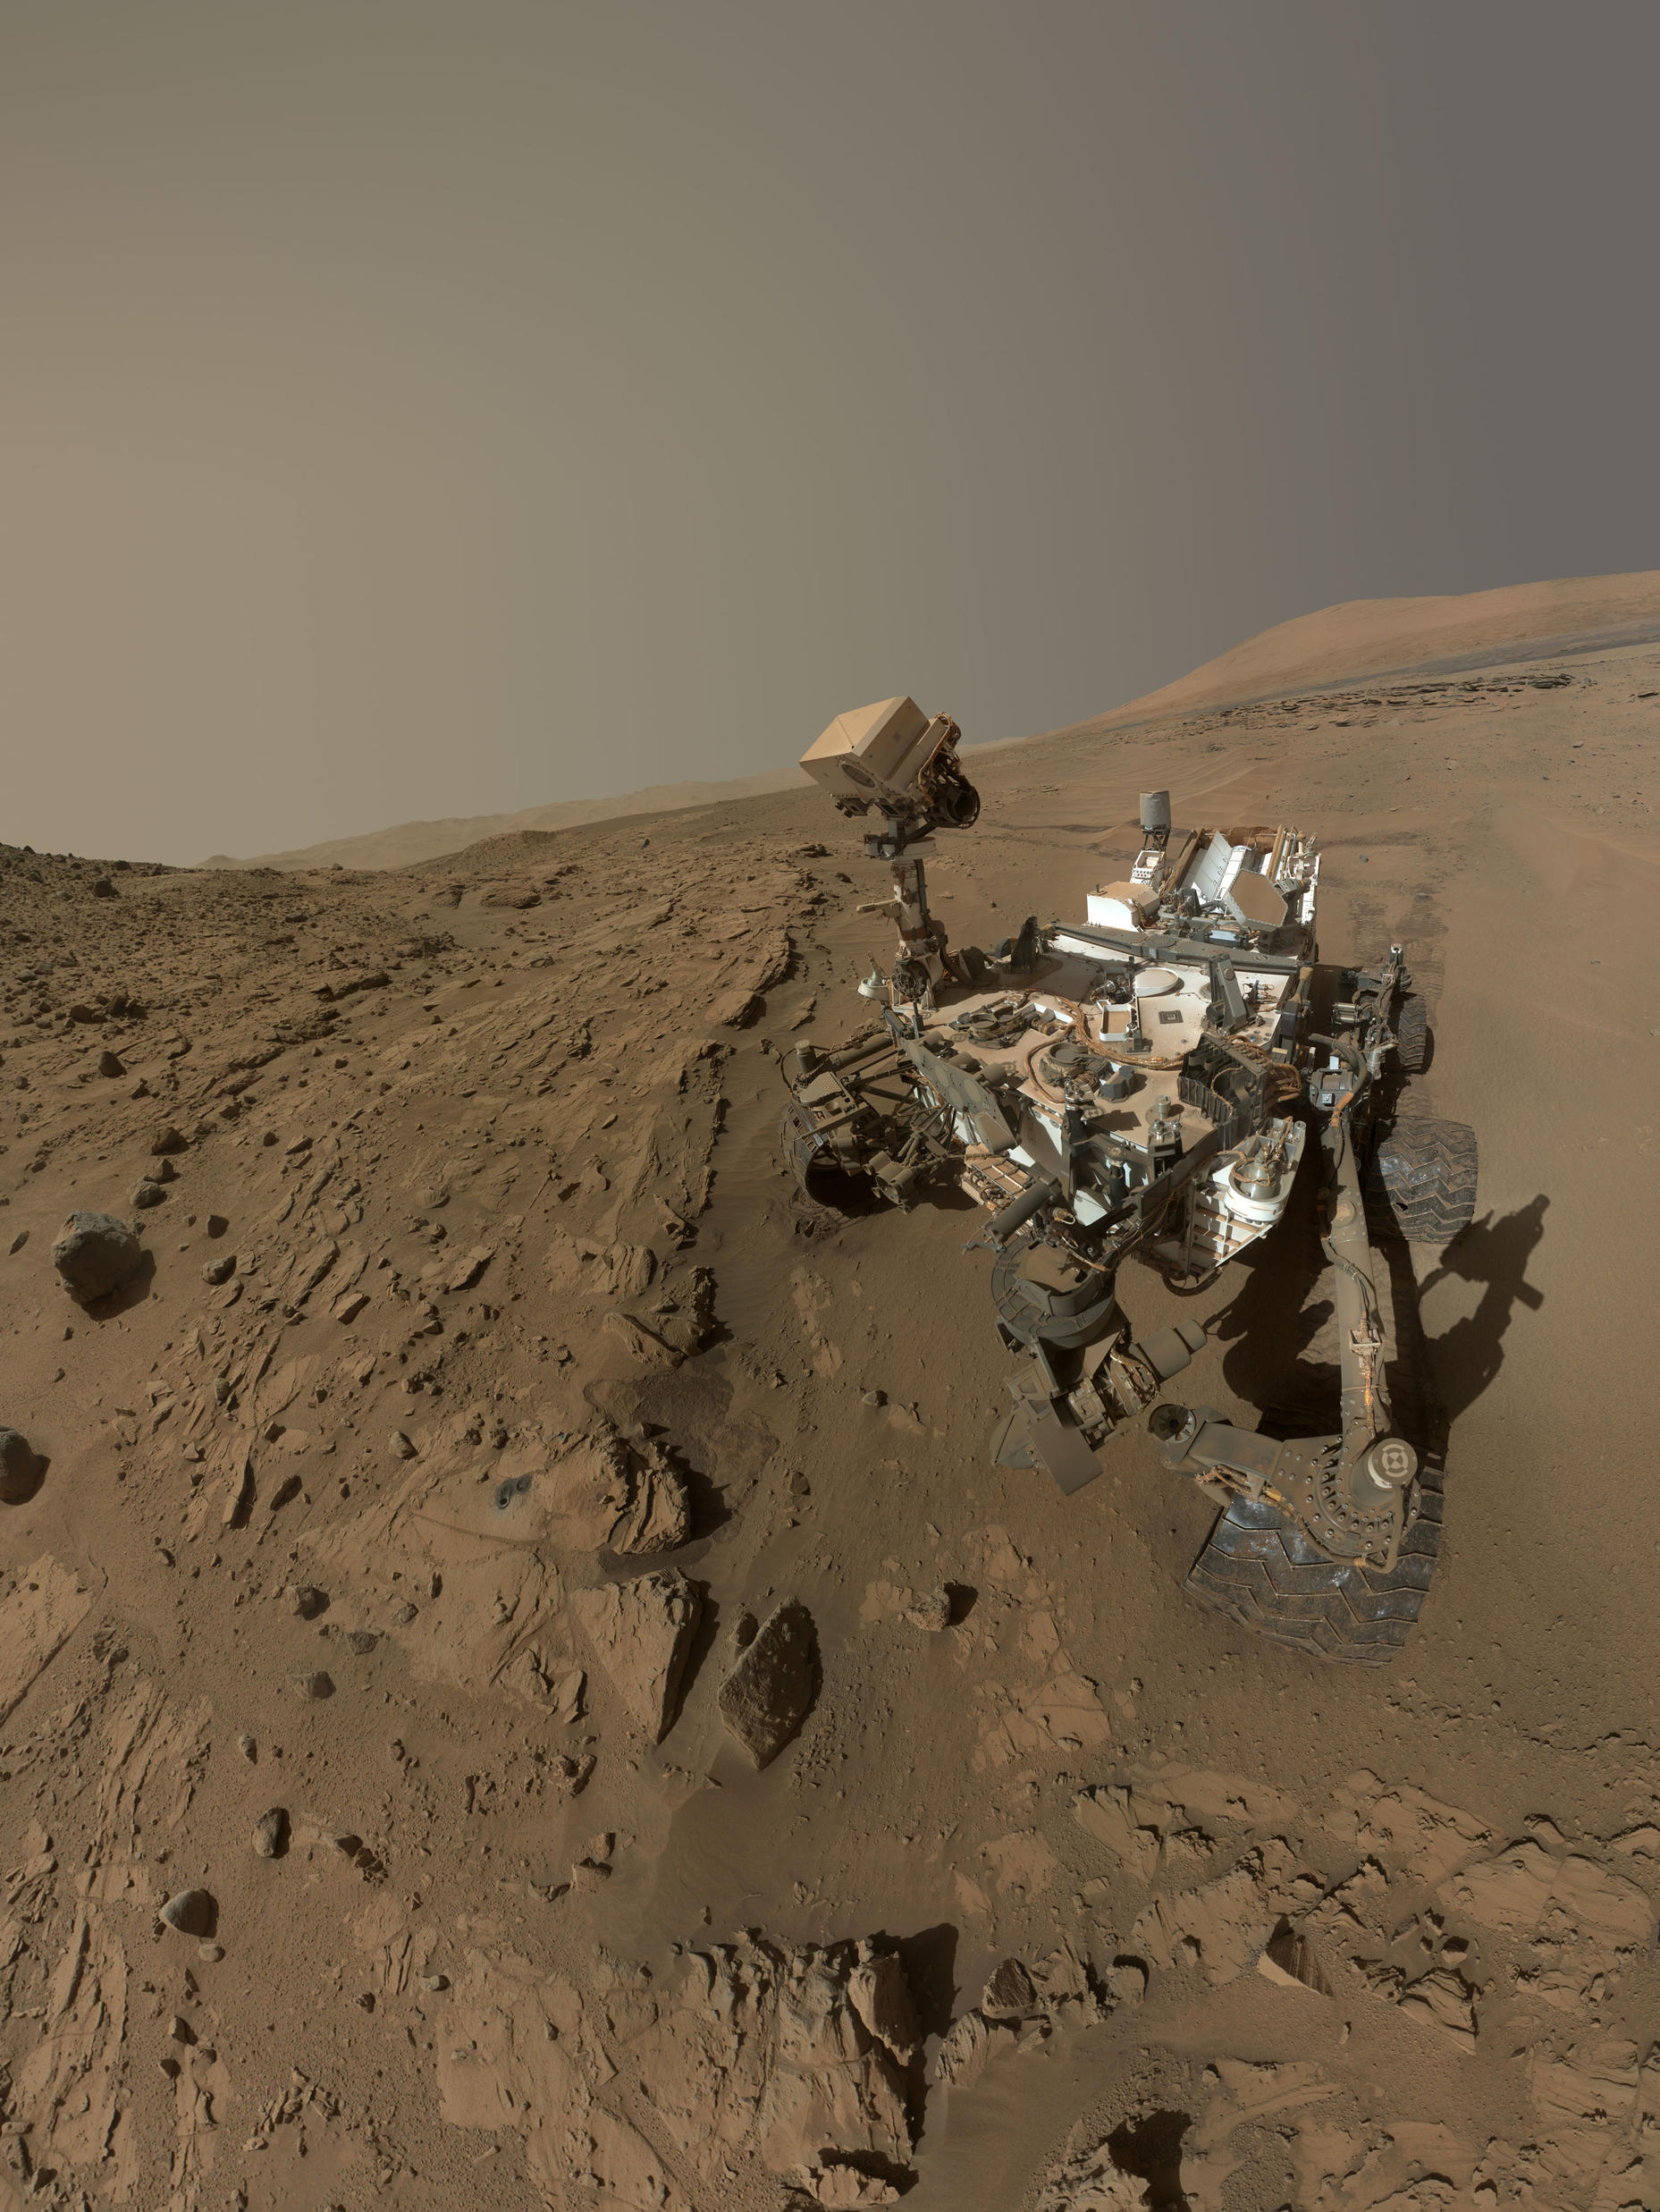 Curiosity Rover selfie from the surface of Mars